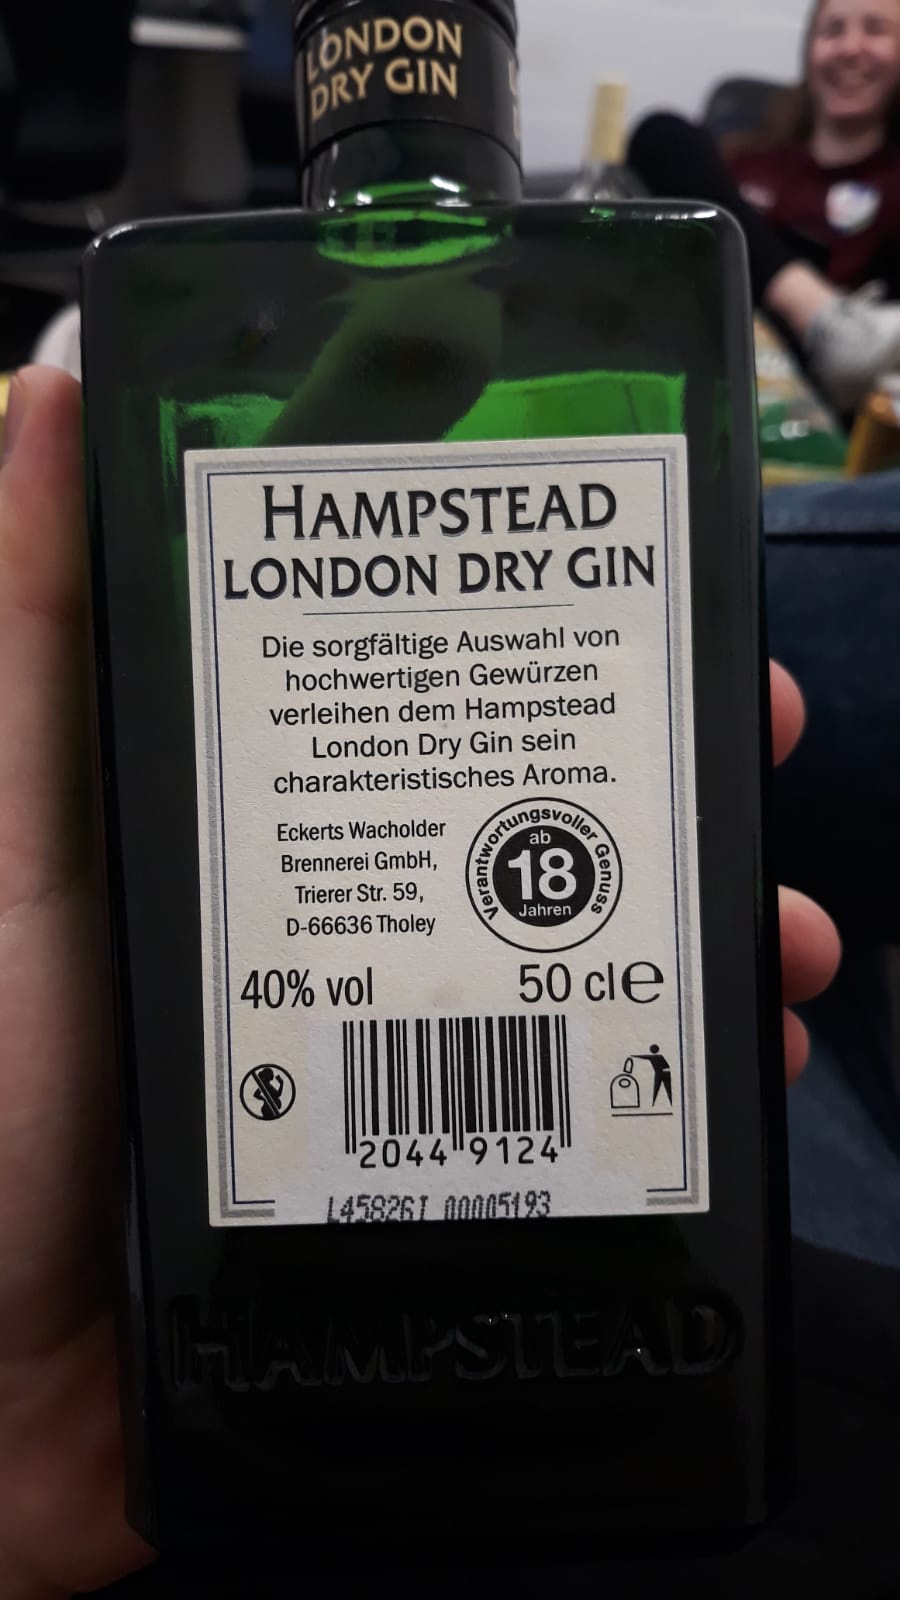 Hampstead London dry gin – Just Visiting